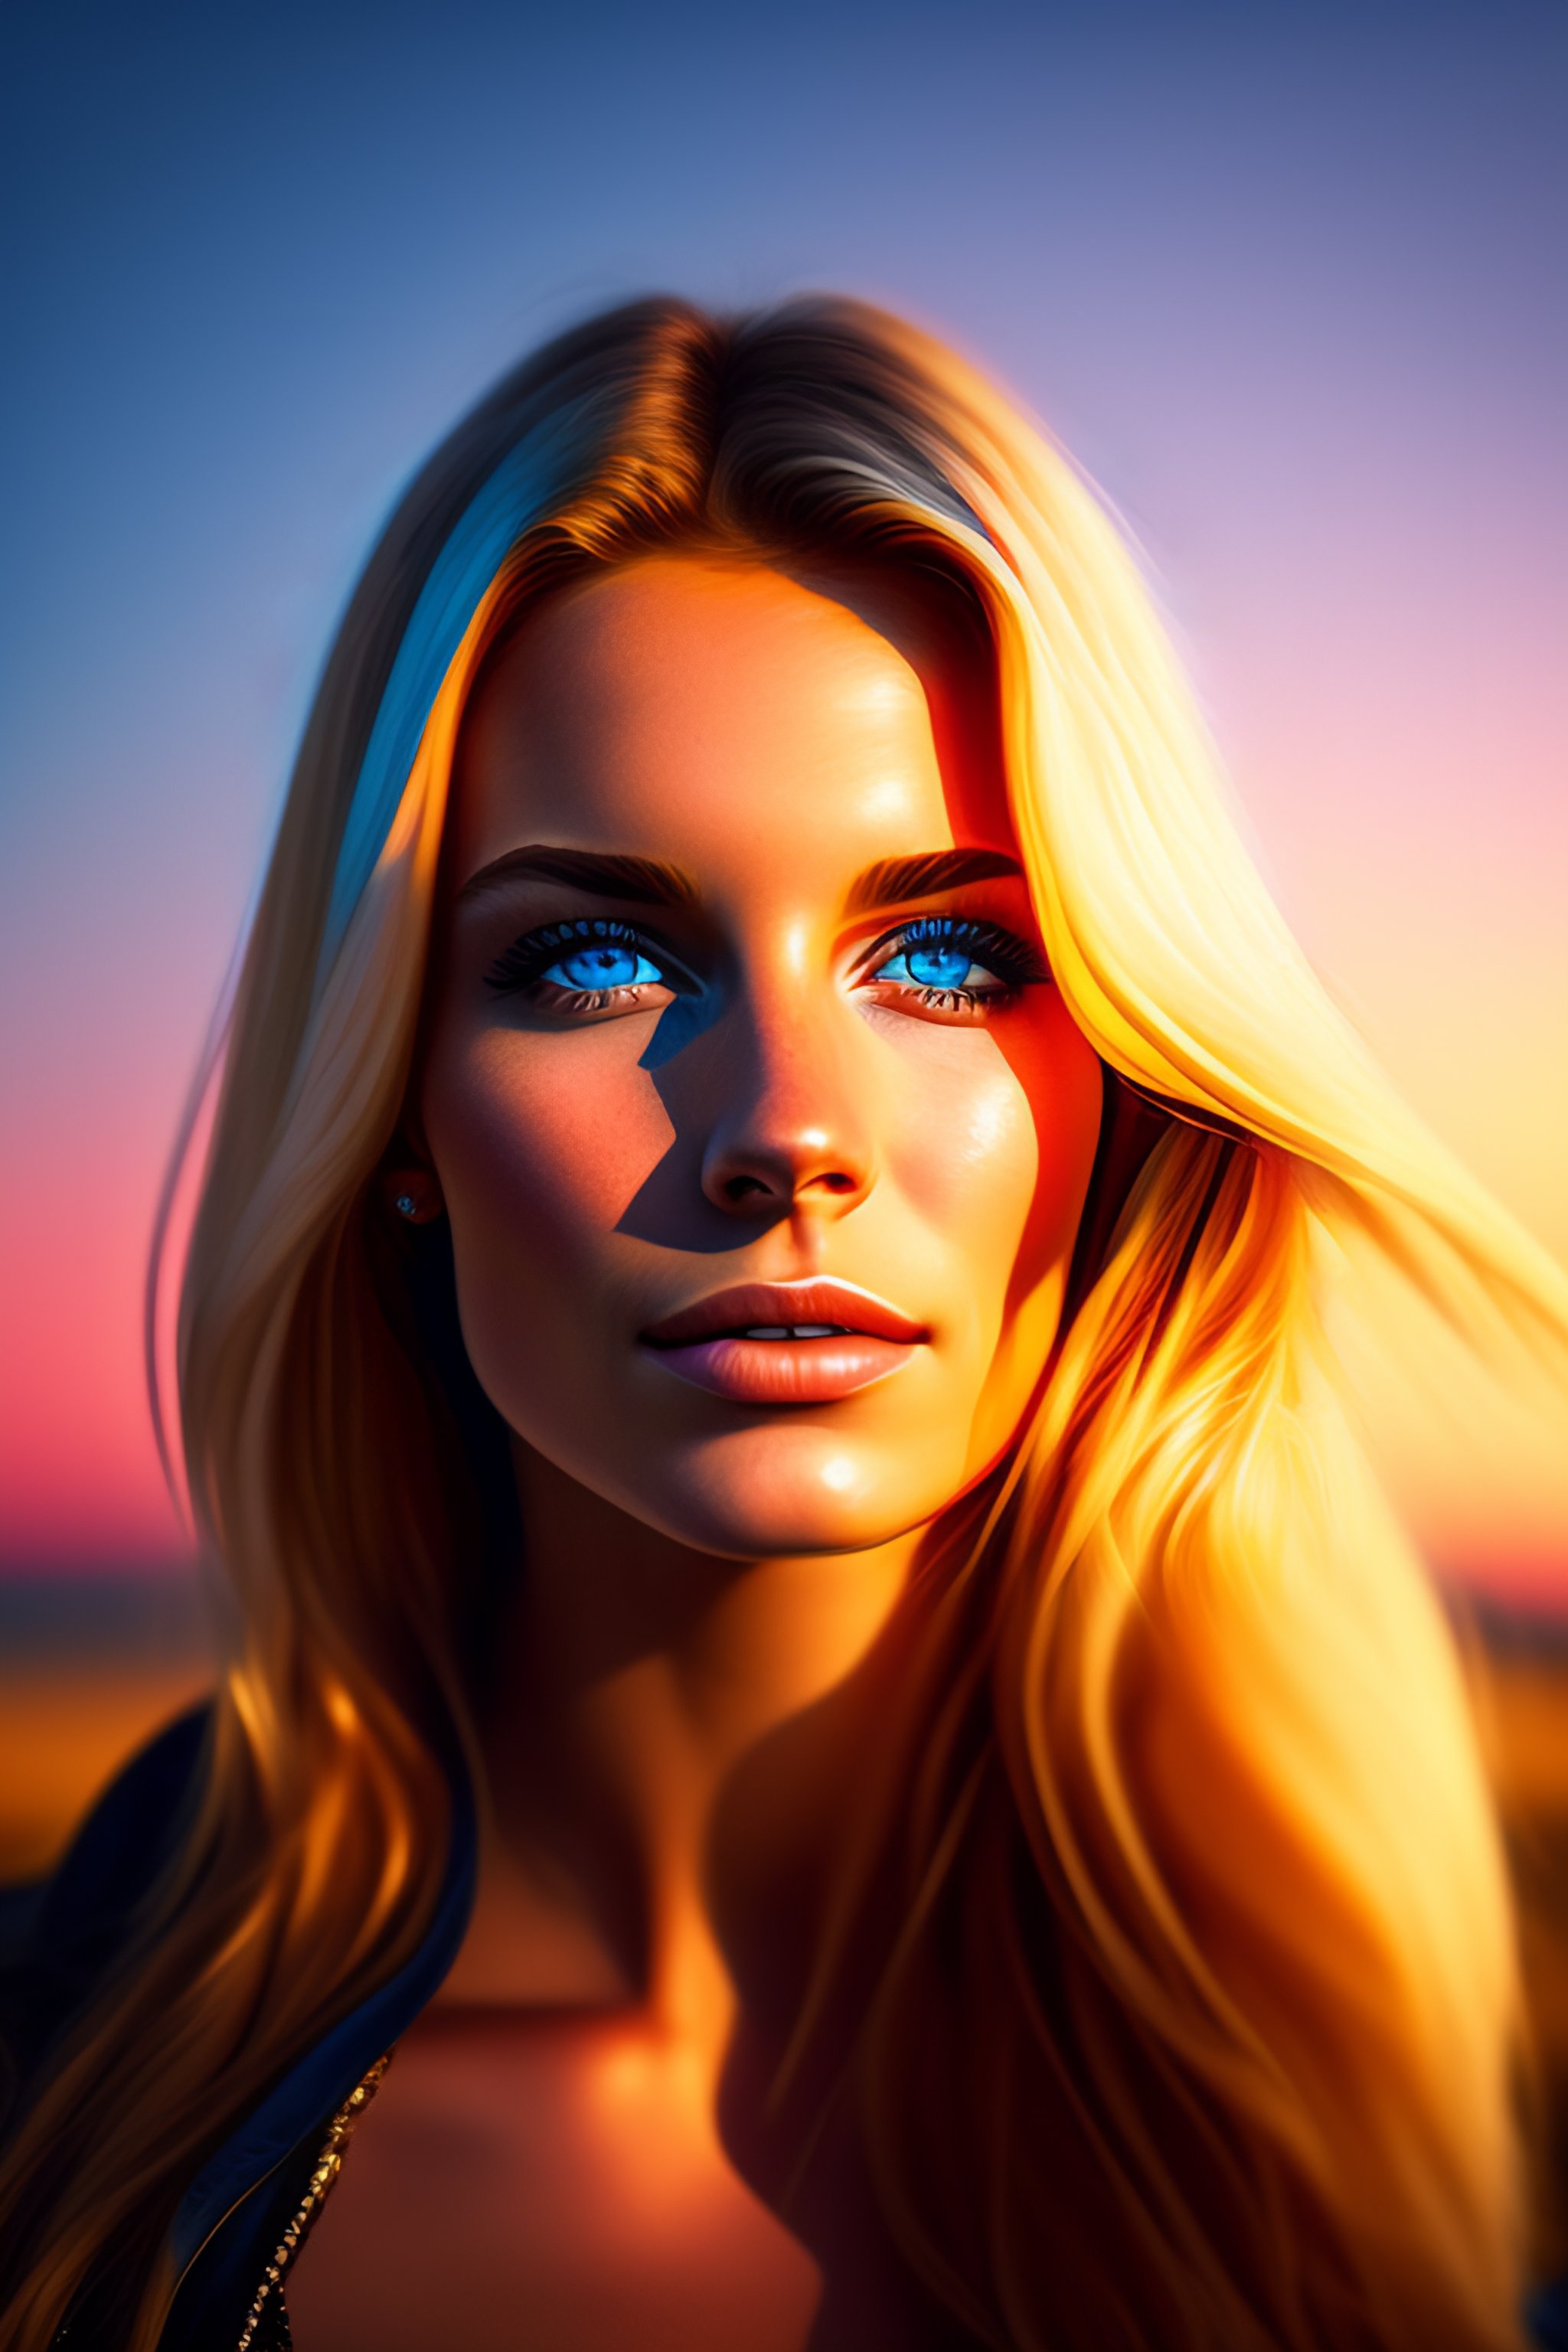 Lexica A Portrait Of A Beautiful 25 Years Old Blonde And Blue Eyes Woman Epic Scene With The 3303